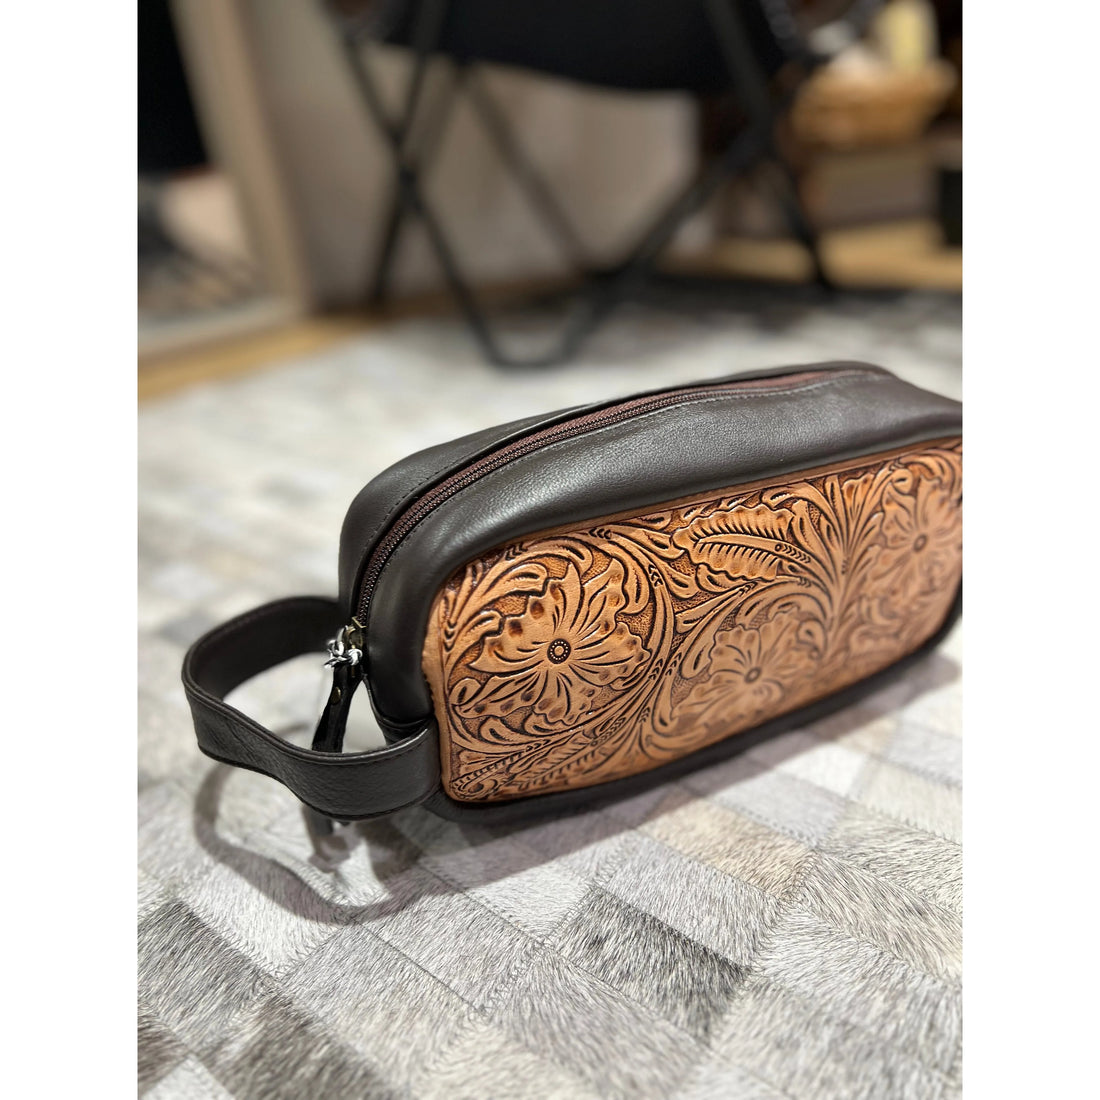 Tooled leather Toiletry Bag 